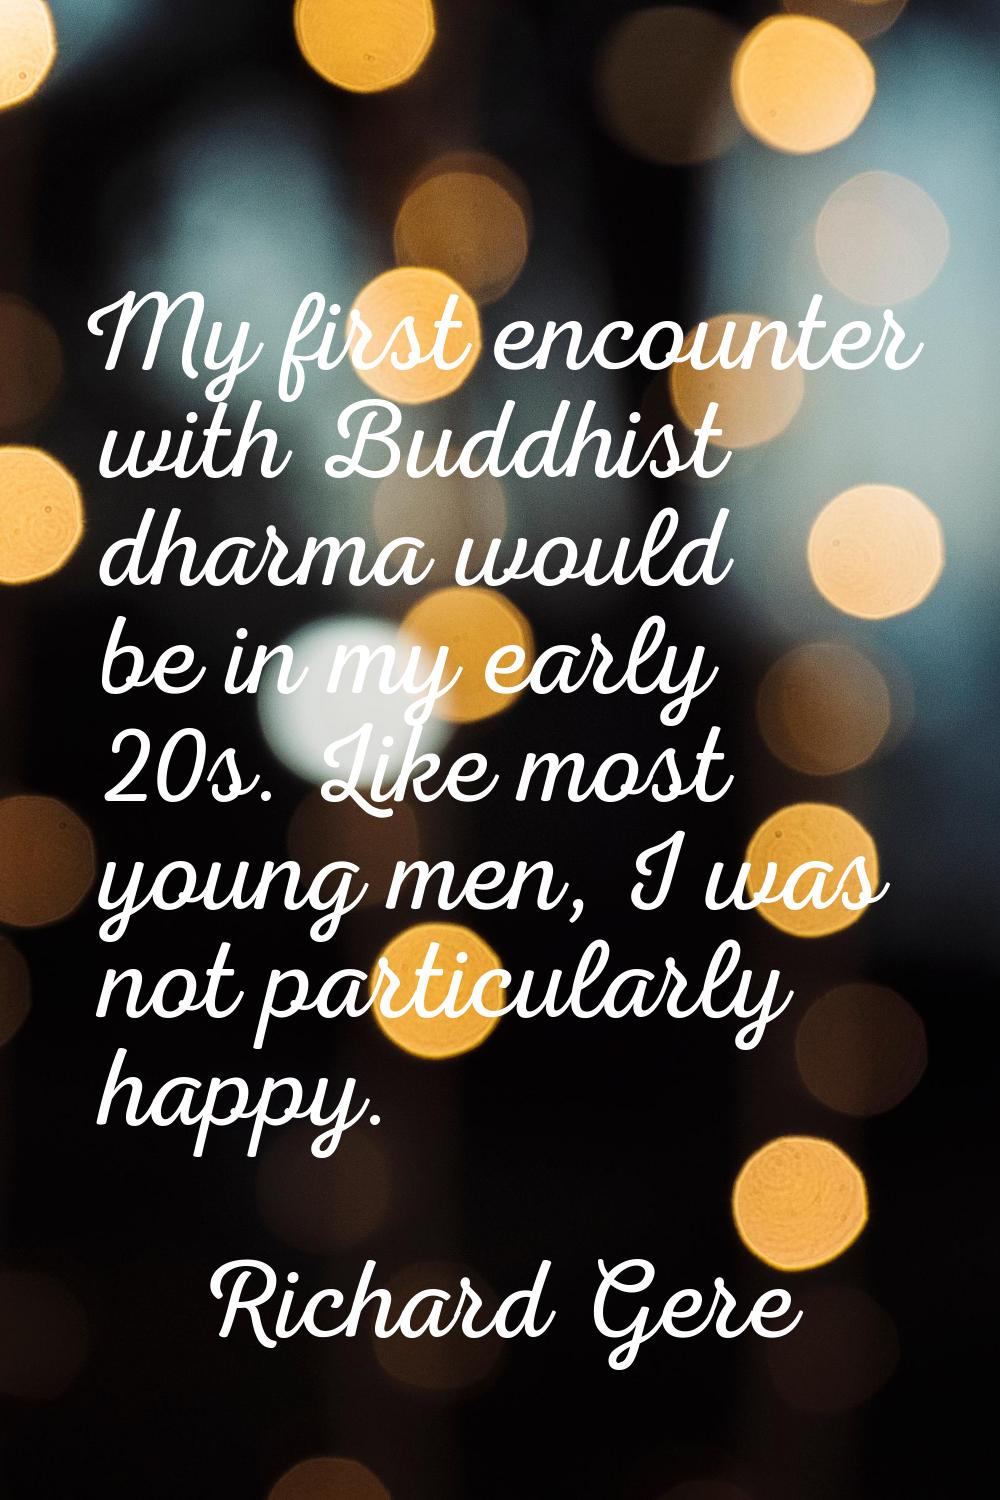 My first encounter with Buddhist dharma would be in my early 20s. Like most young men, I was not pa